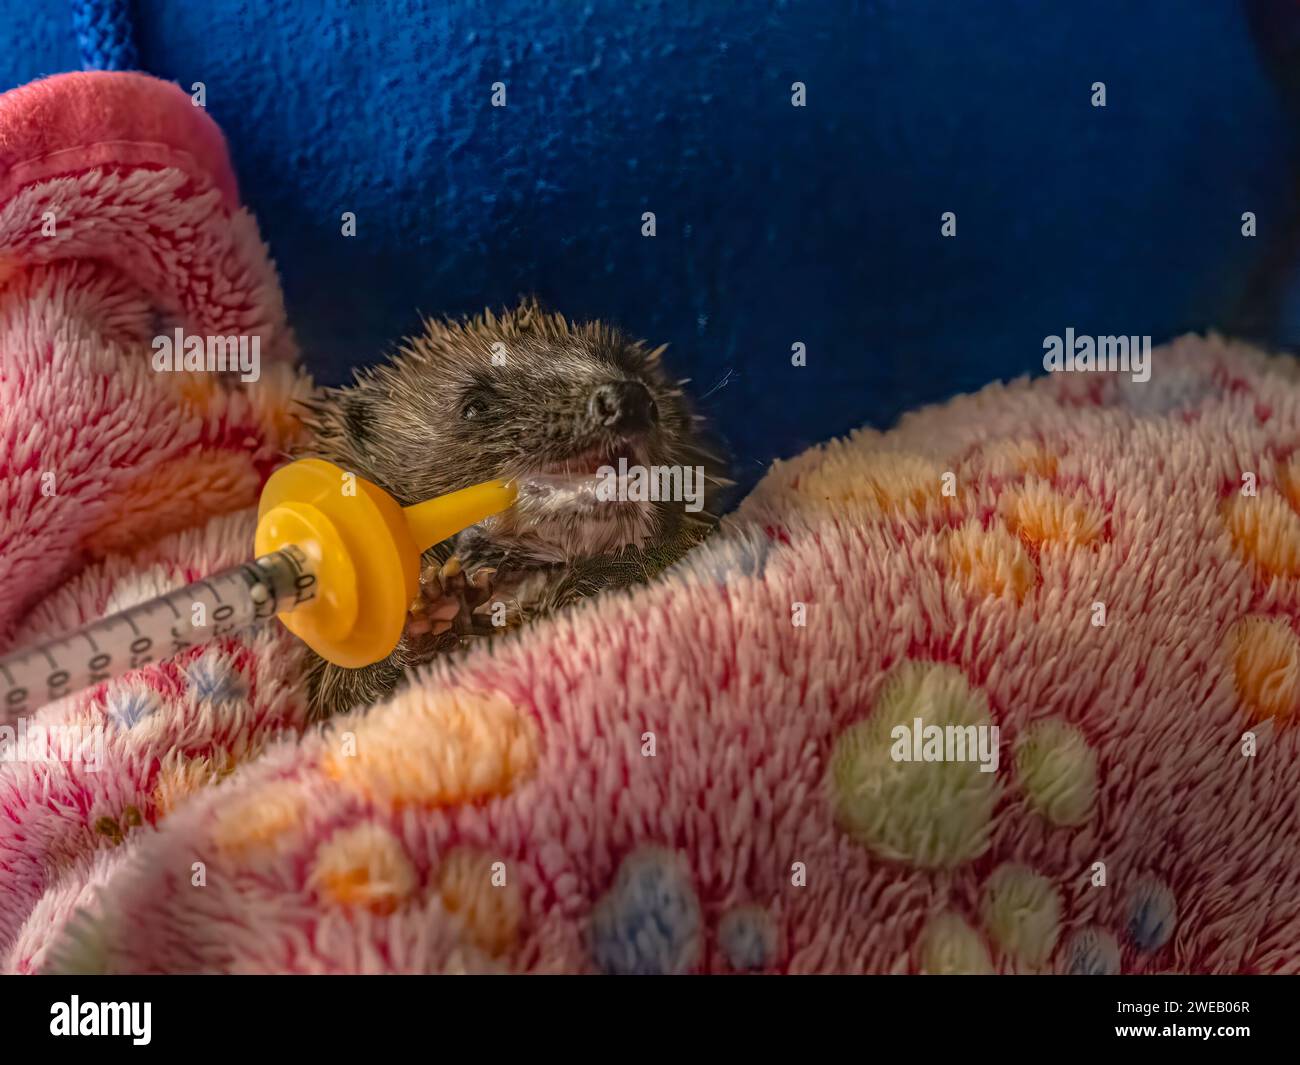 Documentary image of a european hedgehog in a rescue centre in the UK, being fed a specialised formula through a syringe Stock Photo